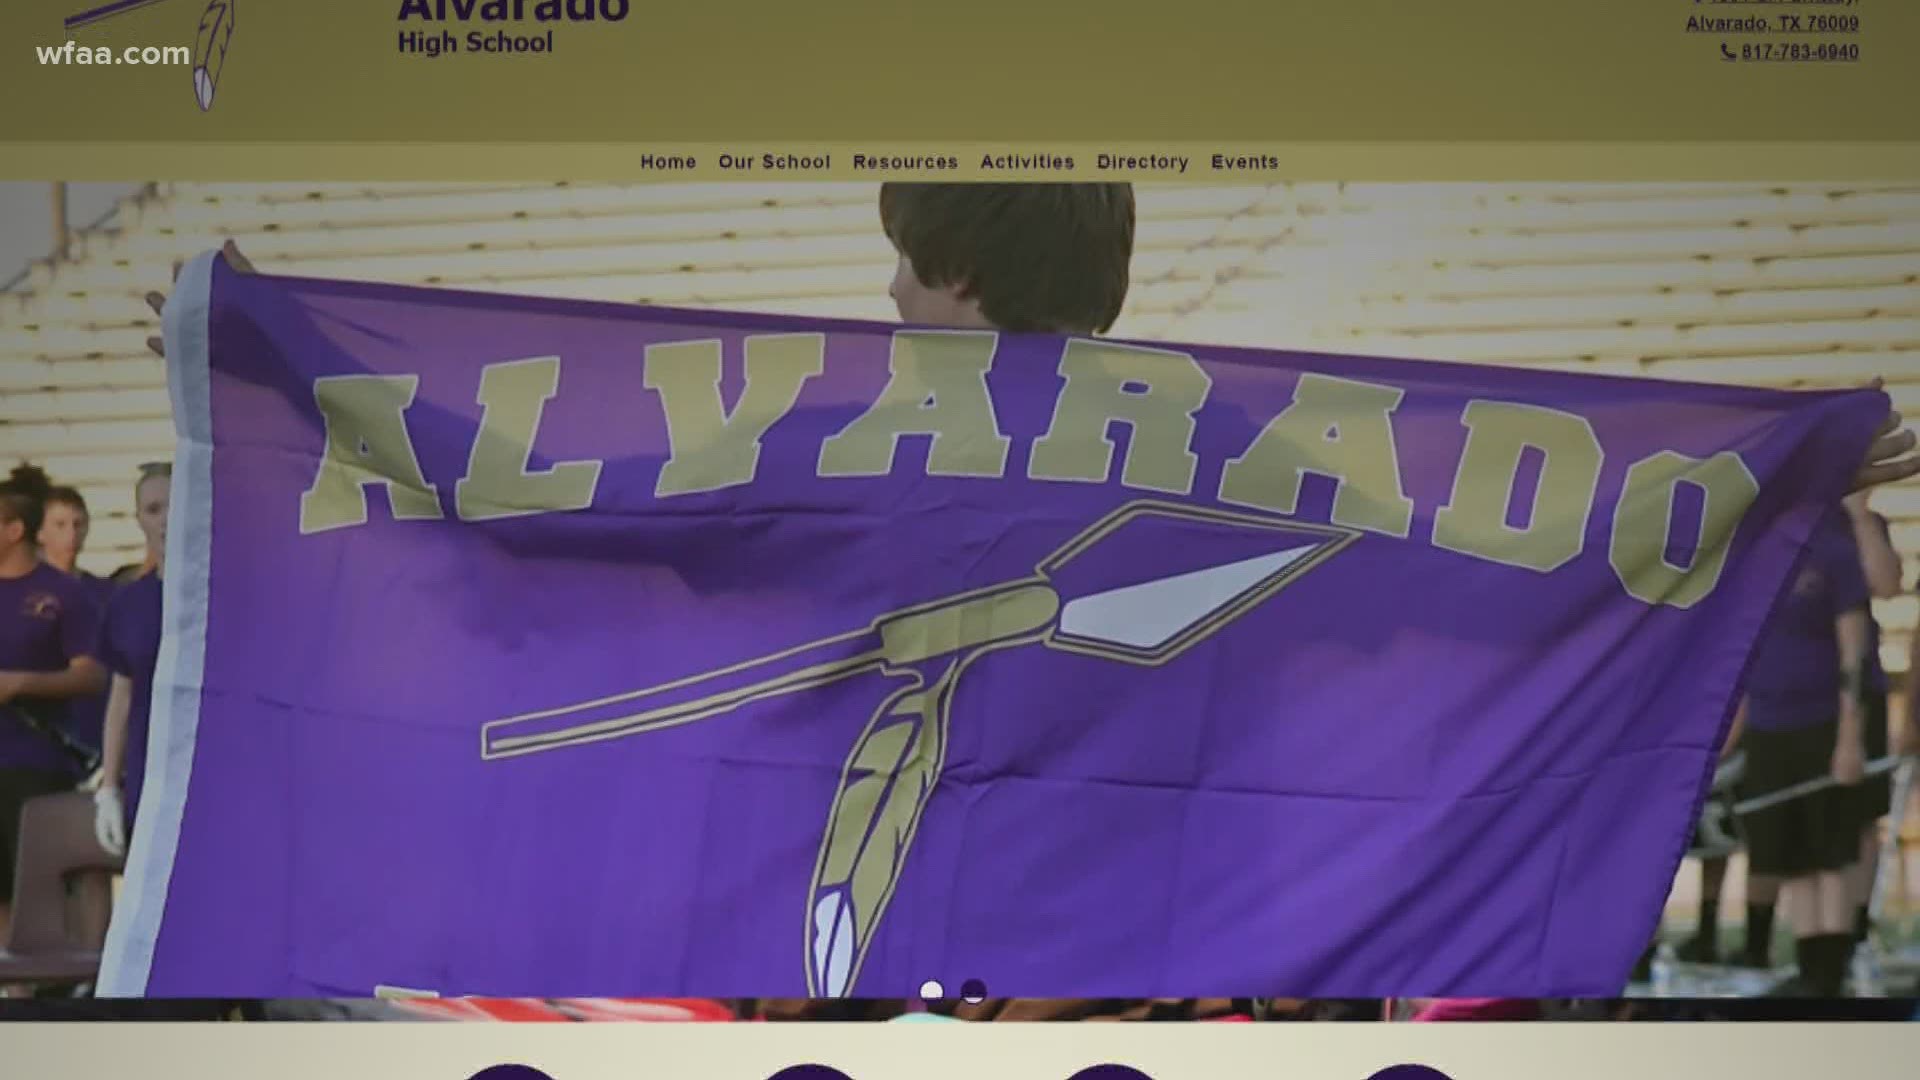 All 132 Alvarado High School band members will quarantine until Oct. 24 after three cases of coronavirus were confirmed within the marching band sphere.